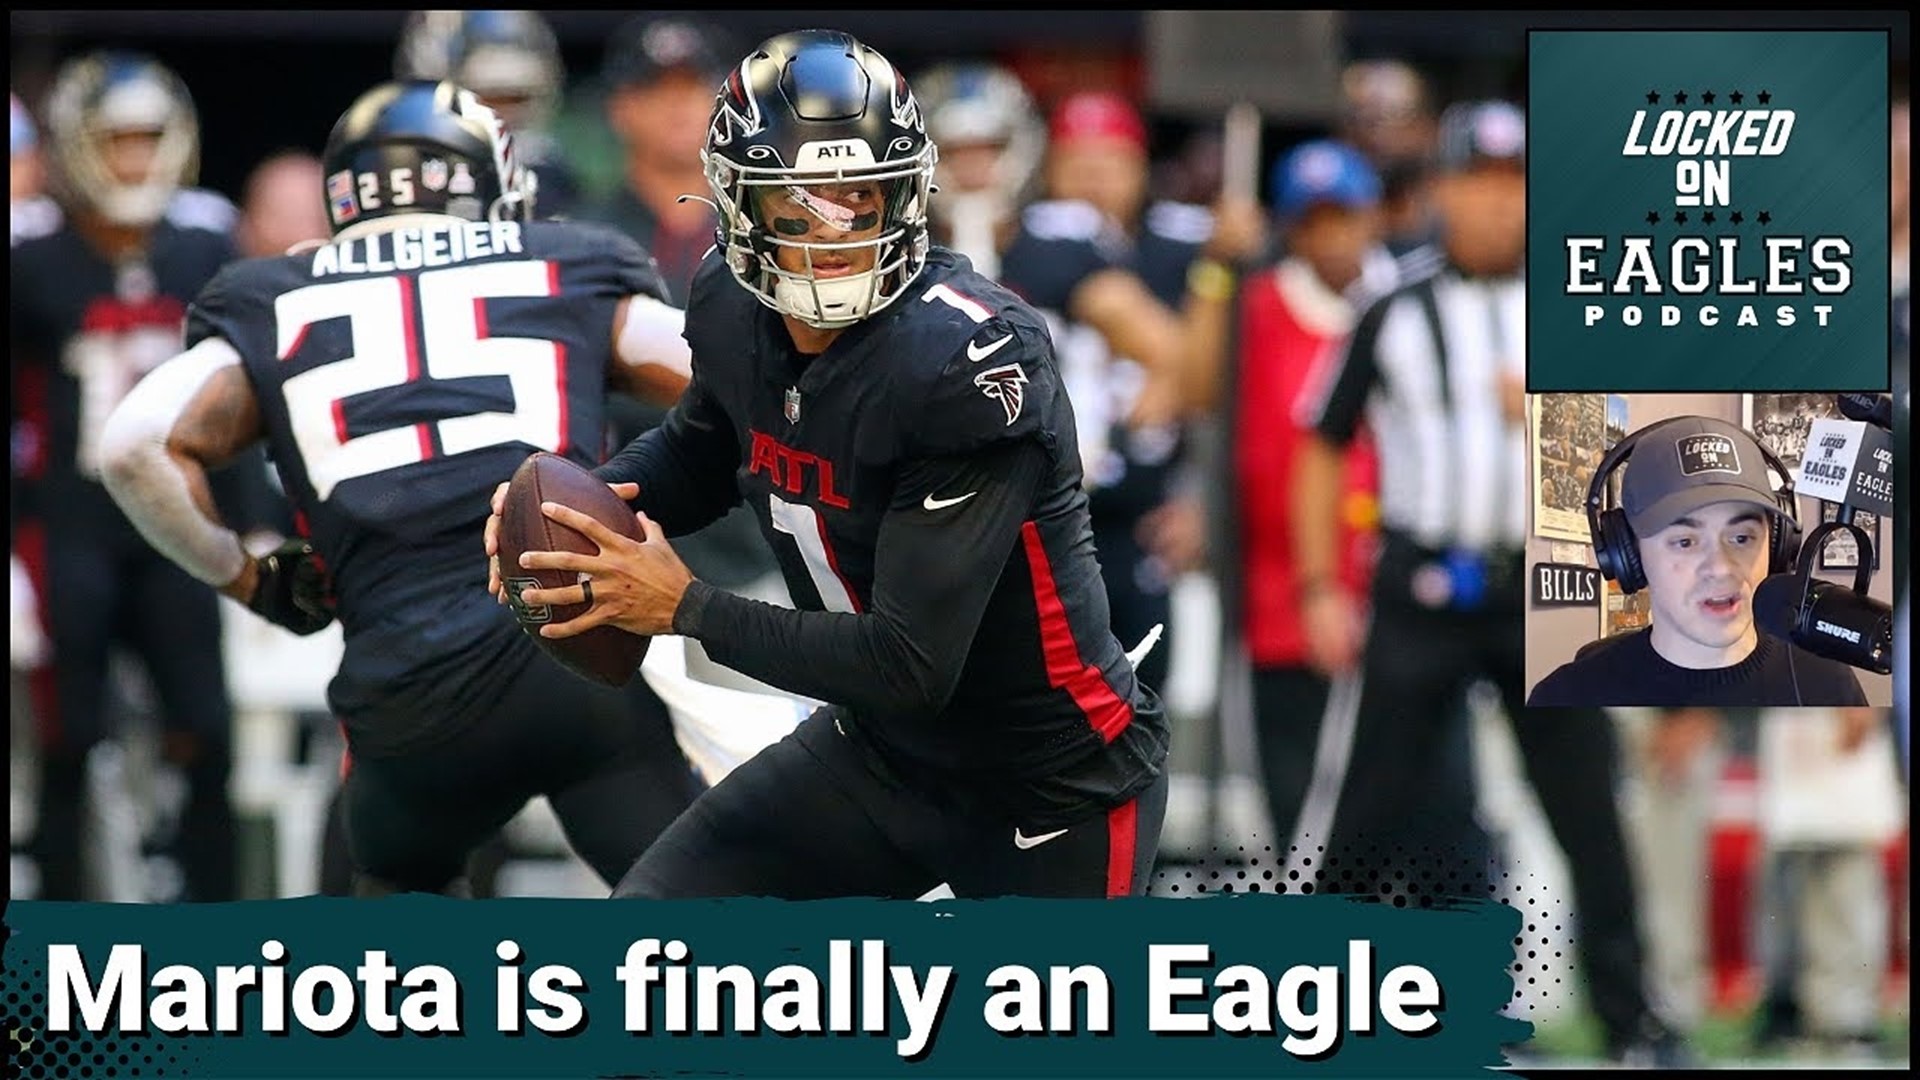 Eight years after former Philadelphia Eagles head coach Chip Kelly tried to "sell the farm" and trade up for Marcus Mariota, the Eagles have finally added him.